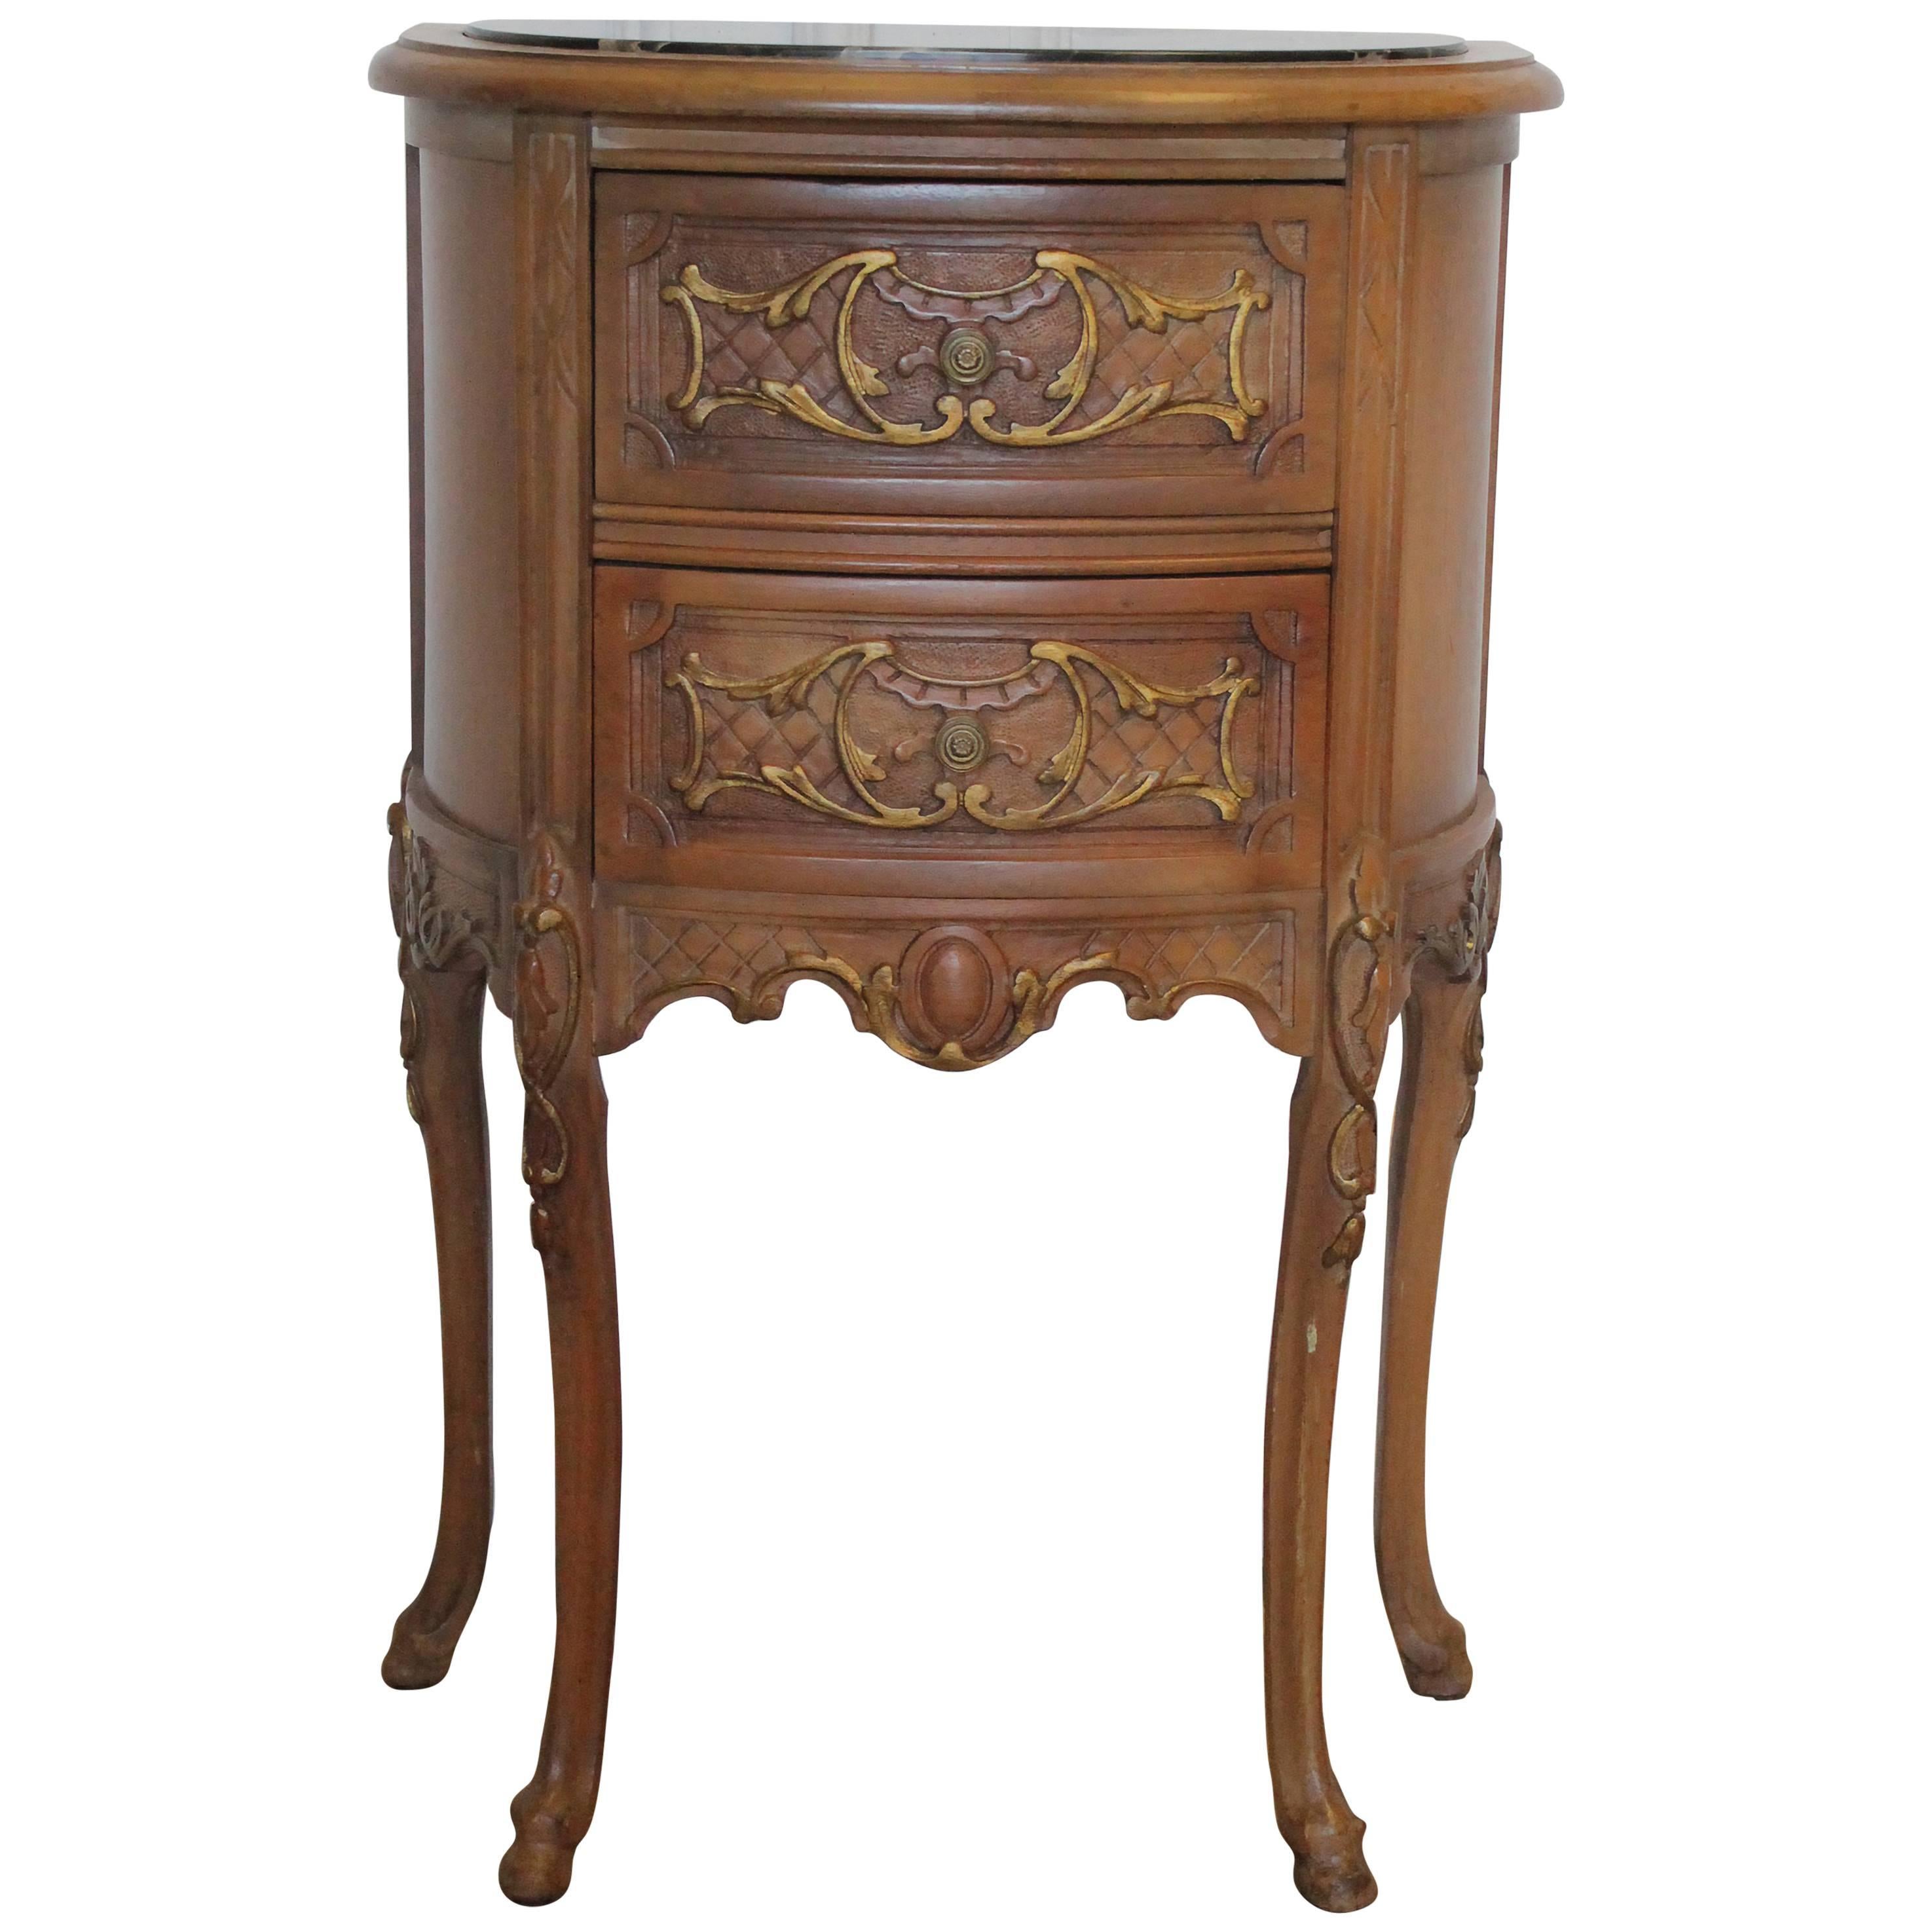 20th Century Two-Drawer Bedside Commode Nightstand with Marble Top